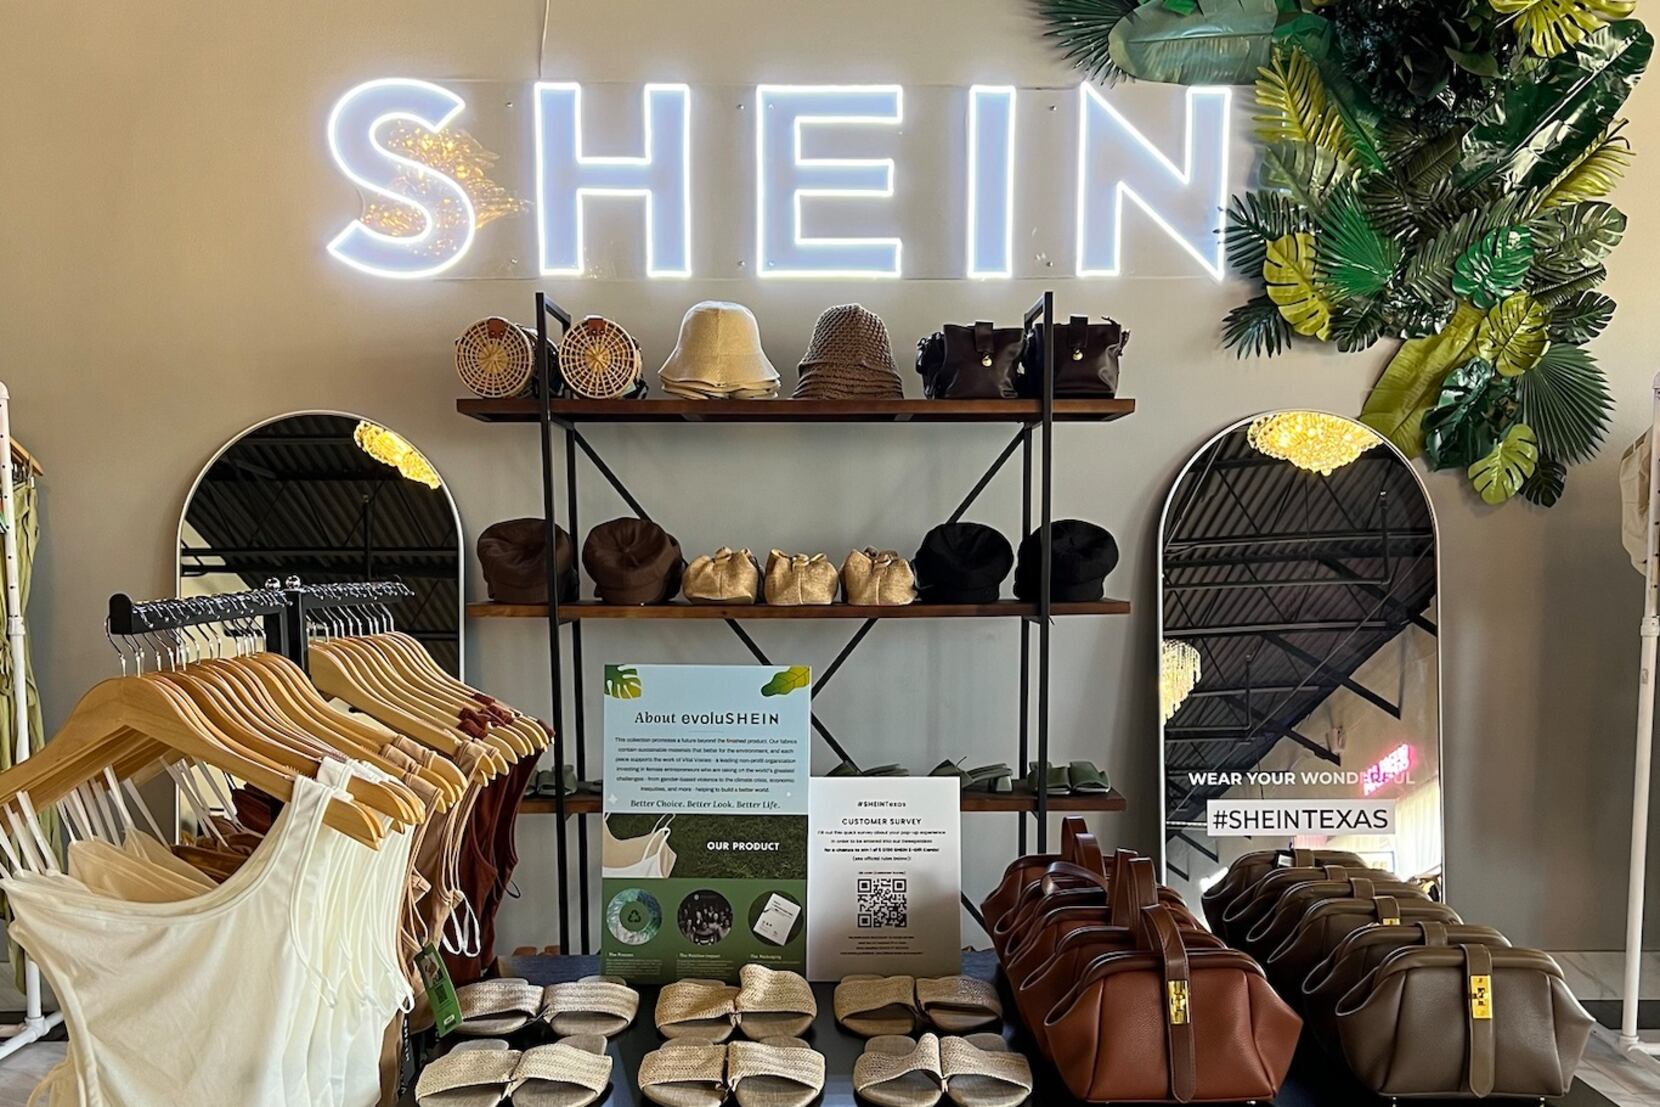 Fashion retailer Shein announces pop-up shop at Plano's The Shops at Willow  Bend